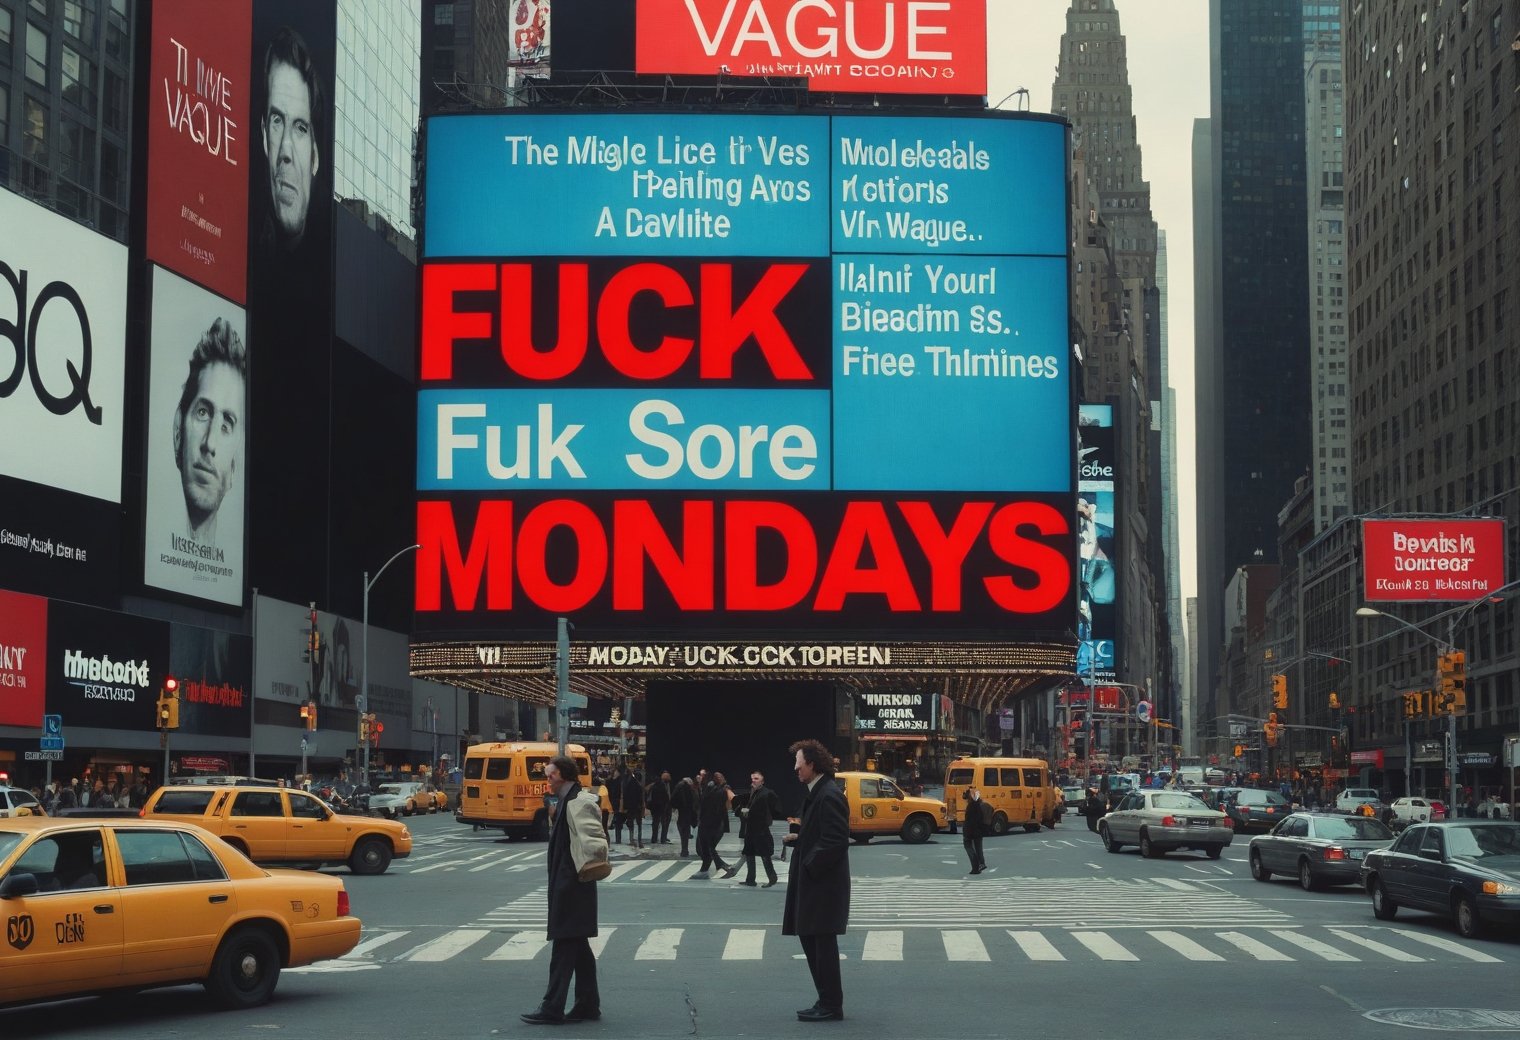 landscape of "FUCK MONDAYS", time square billboard sign, directed by Joel Coen Jump cuts, on-location shooting, natural lighting, existential themes, free-form style, improvised dialogue, breathless pacing, nouvelle vague, Godard-esque, Truffaut touches, handheld realism, philosophical